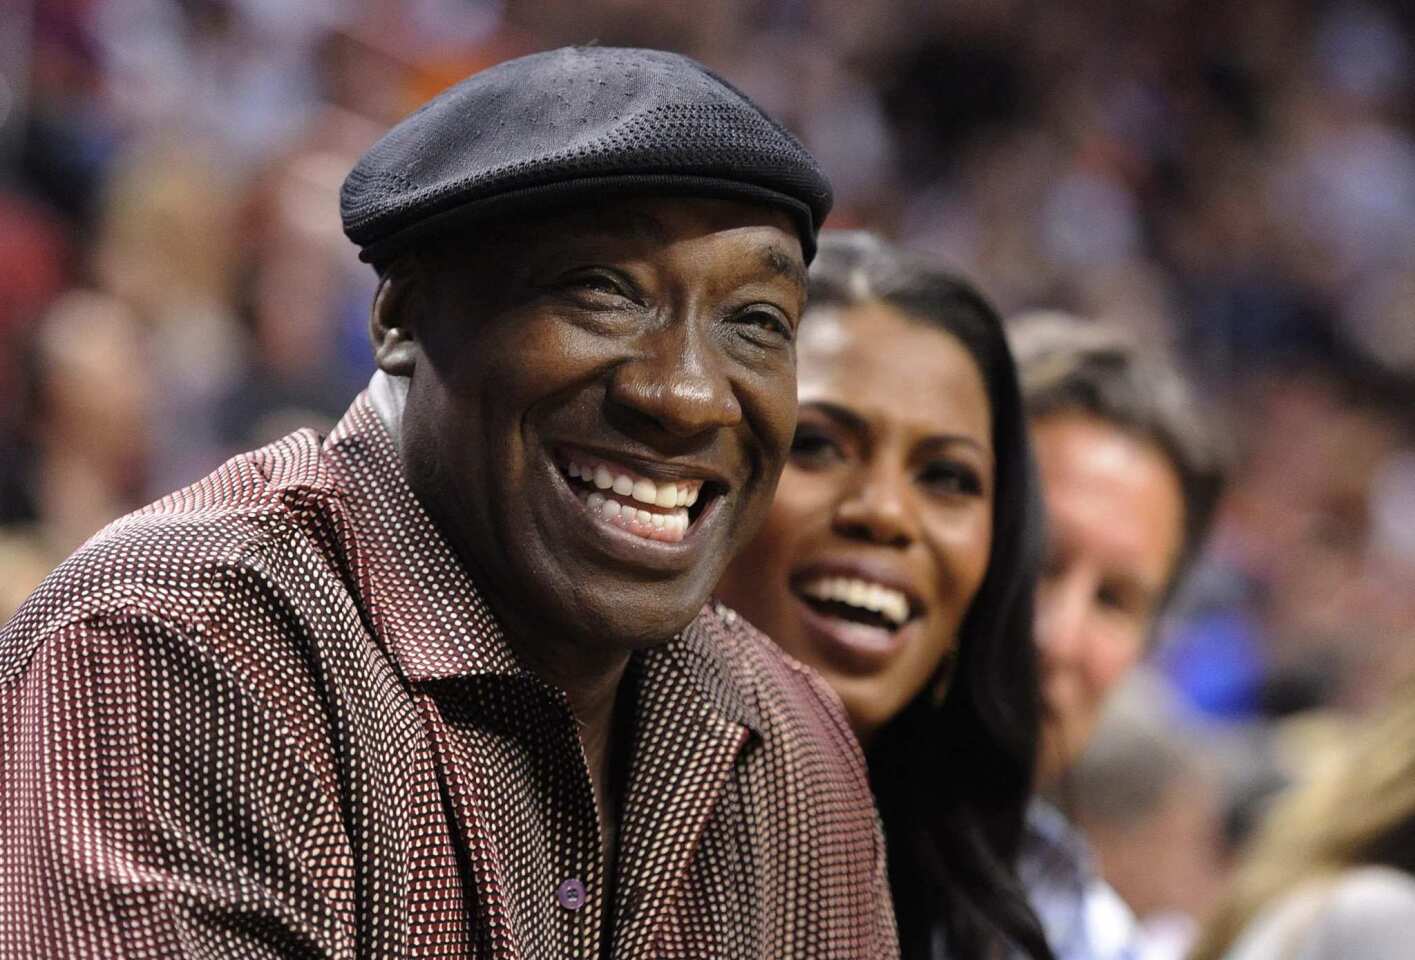 Michael Clarke Duncan in 2011 at a New York Knicks-Miami Heat game at the American Airlines Arena in Miami.